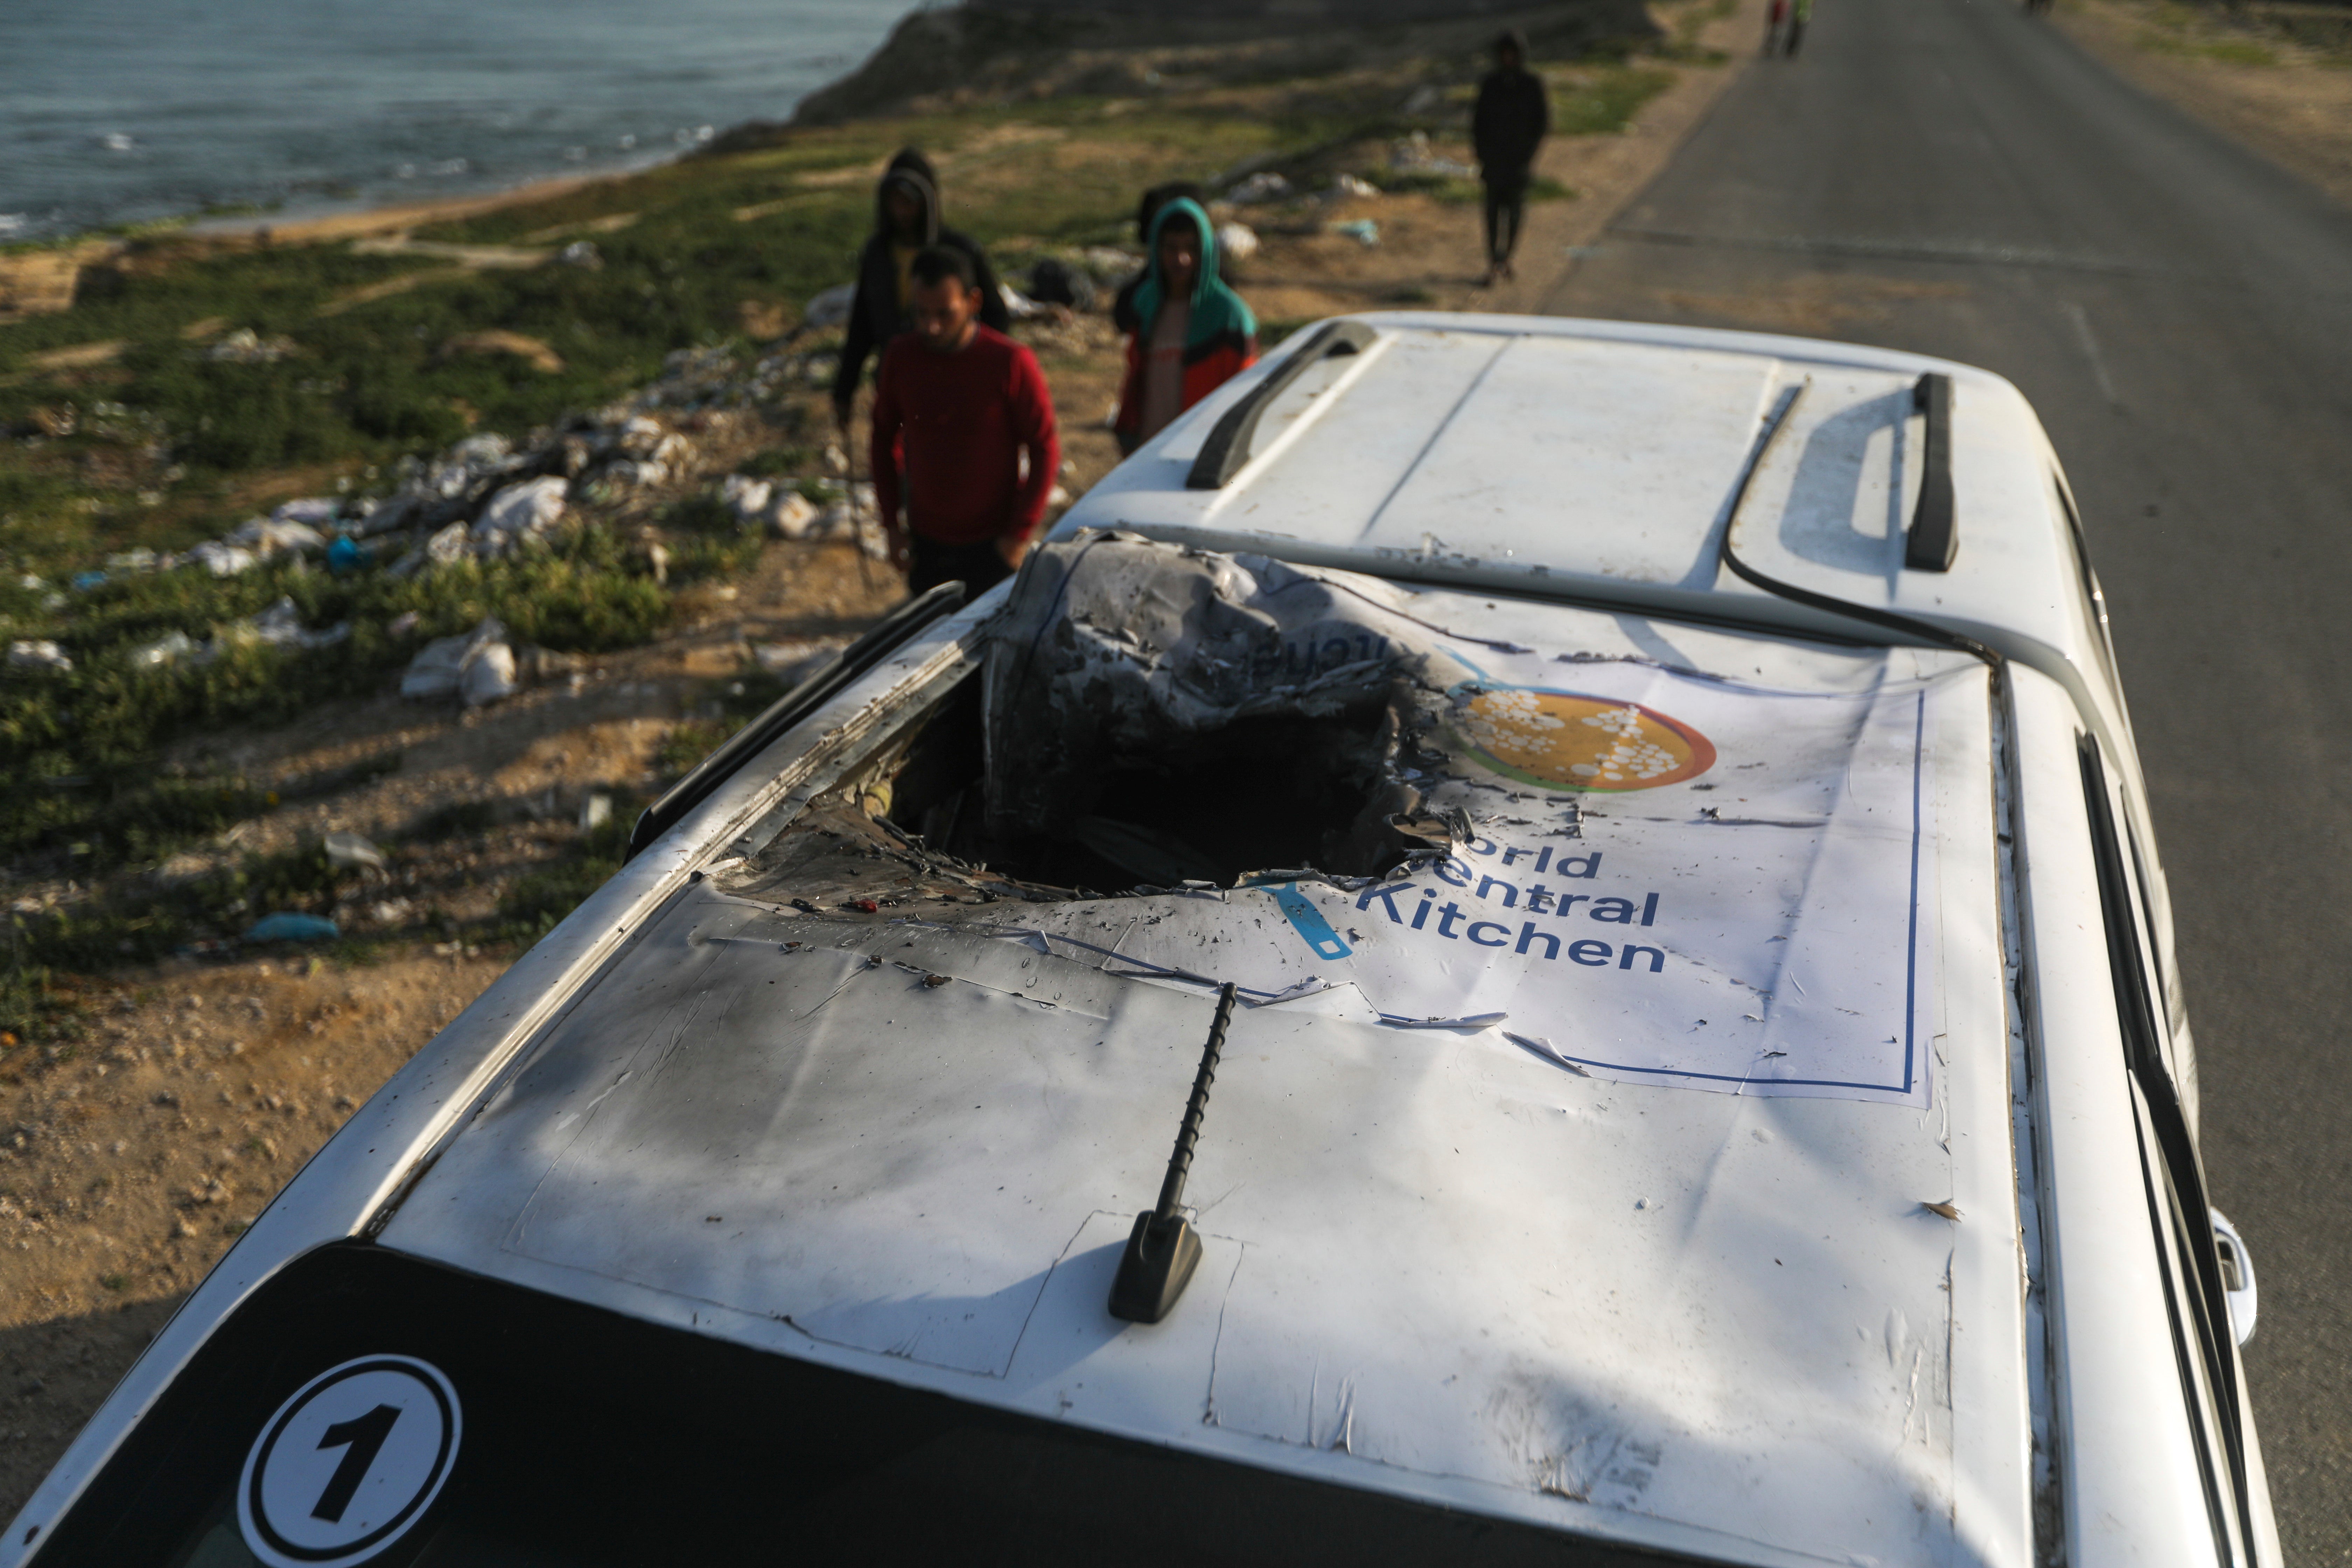 Palestinians inspect a vehicle with the logo of the World Central Kitchen wrecked by an Israeli airstrike in Deir al Balah, Gaza